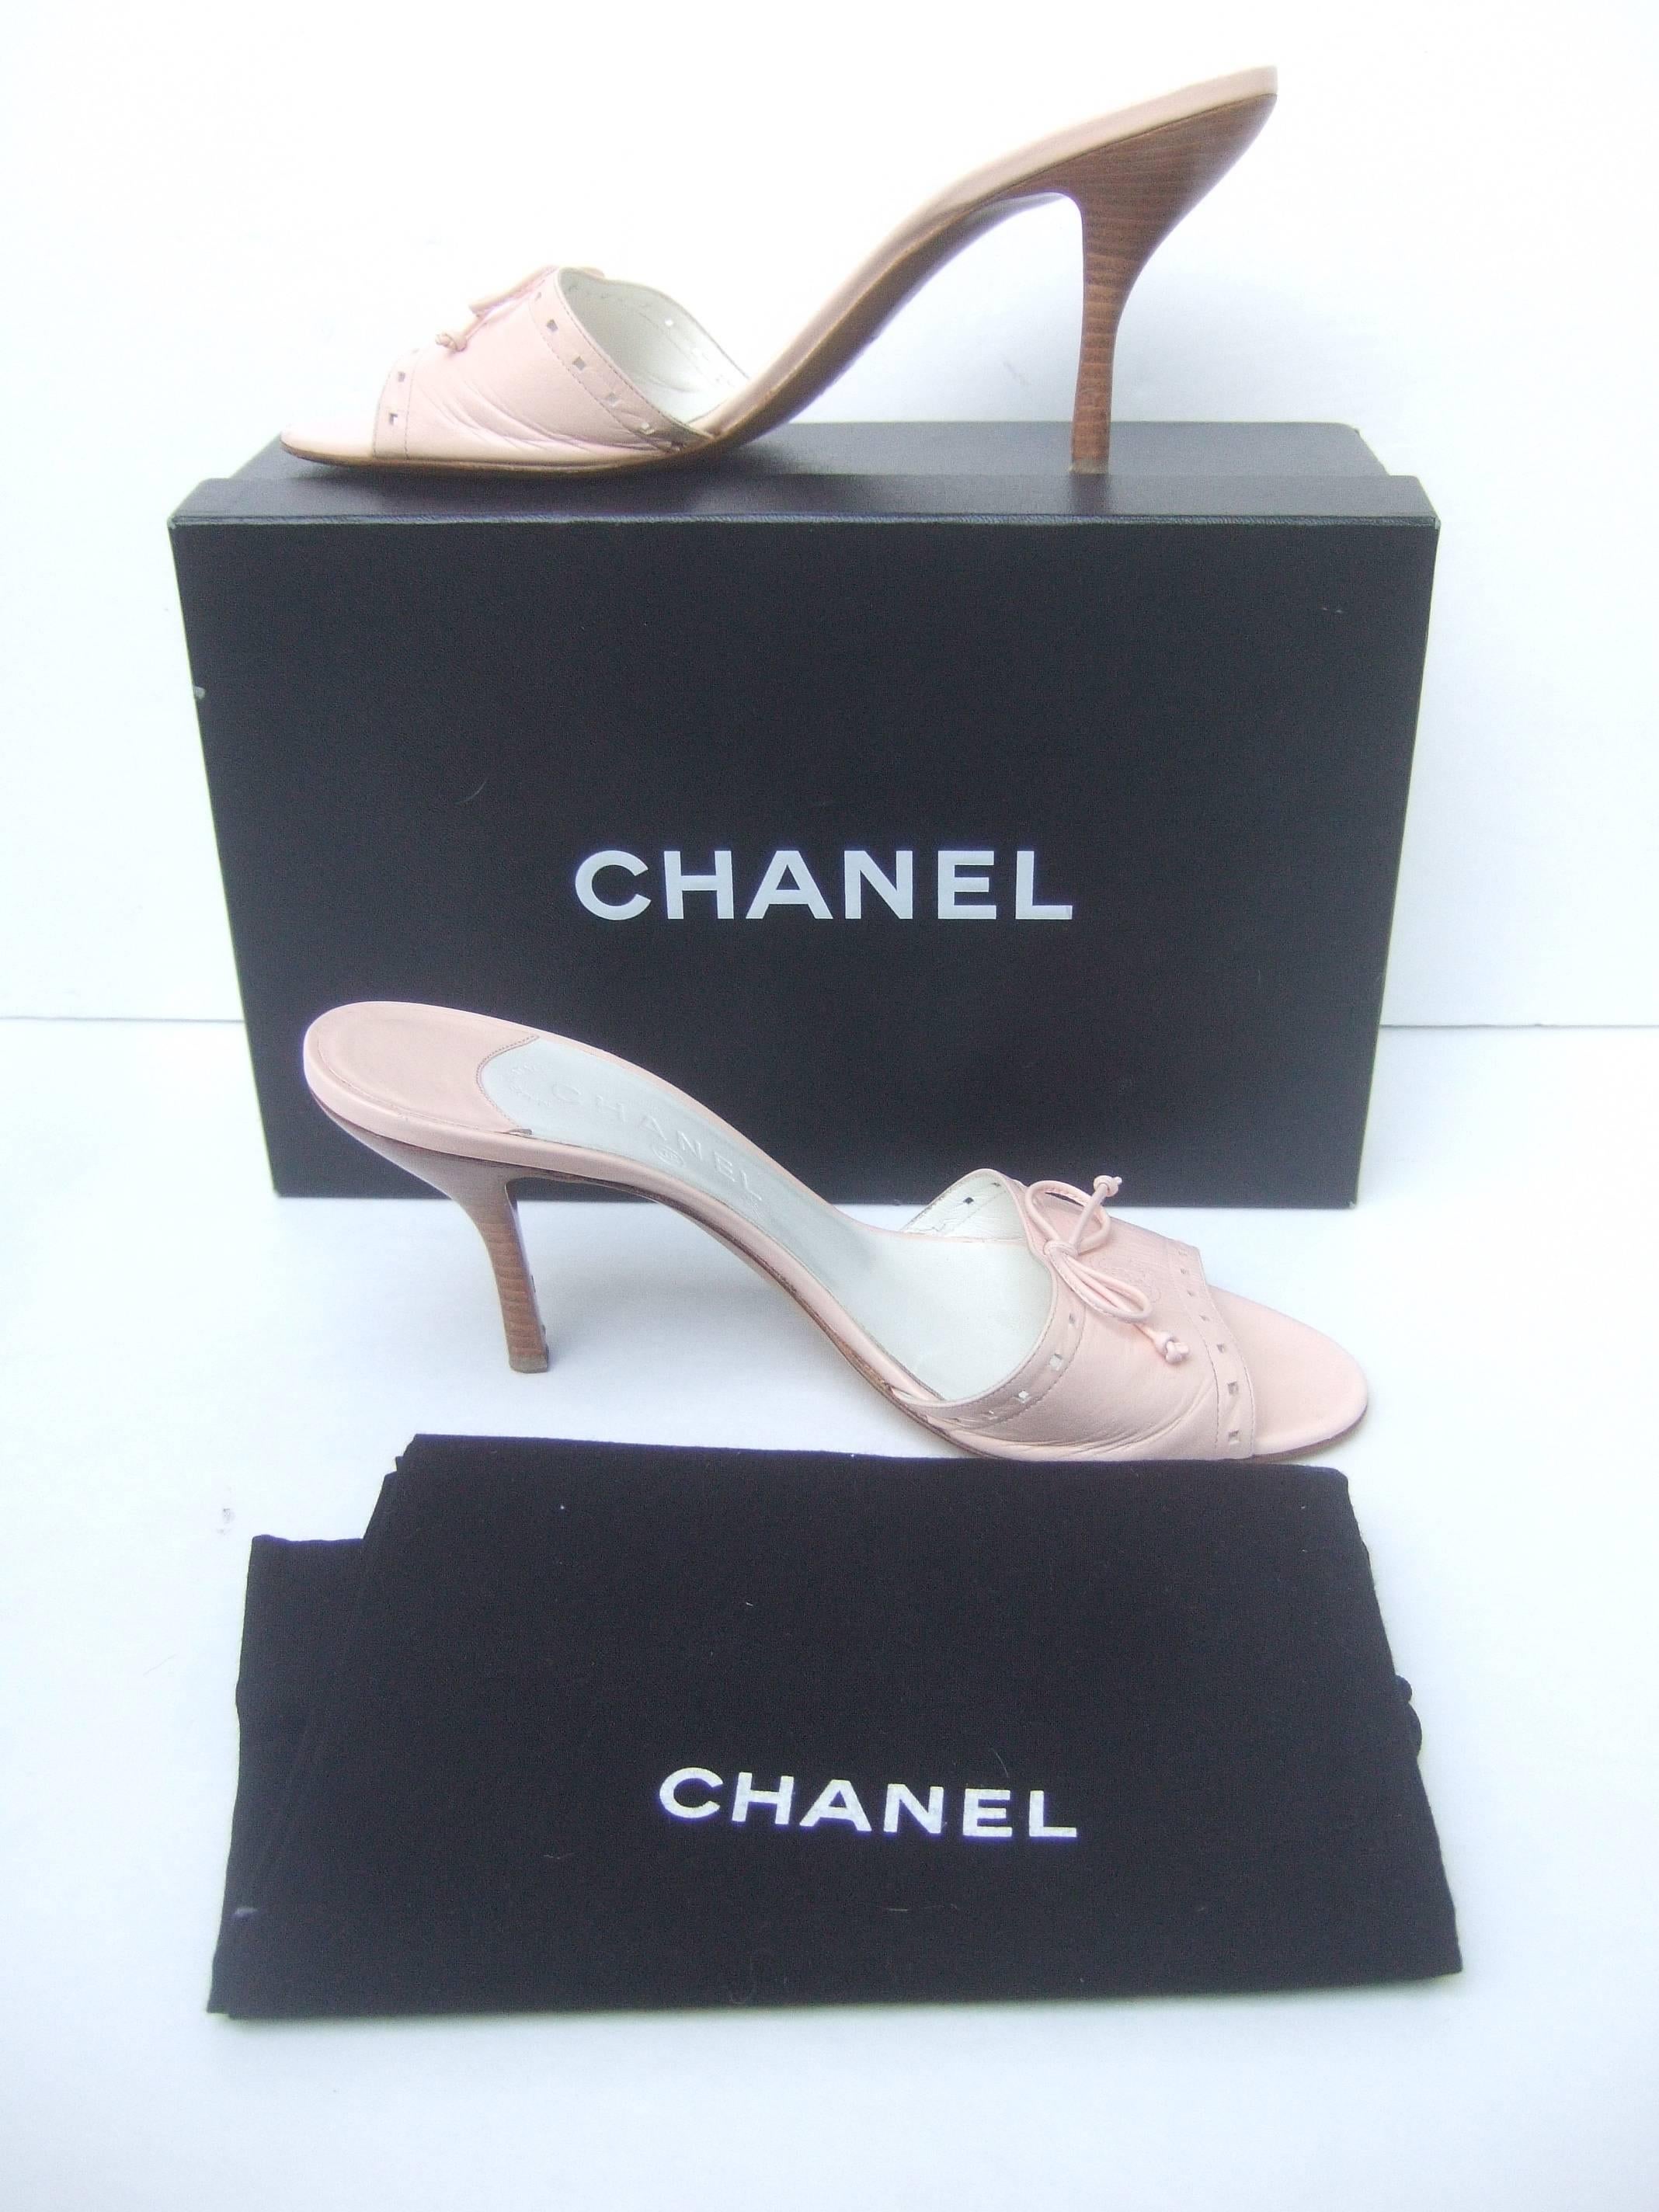 Gray Chanel Classic Pale Pink Leather Mules in Box Size 40